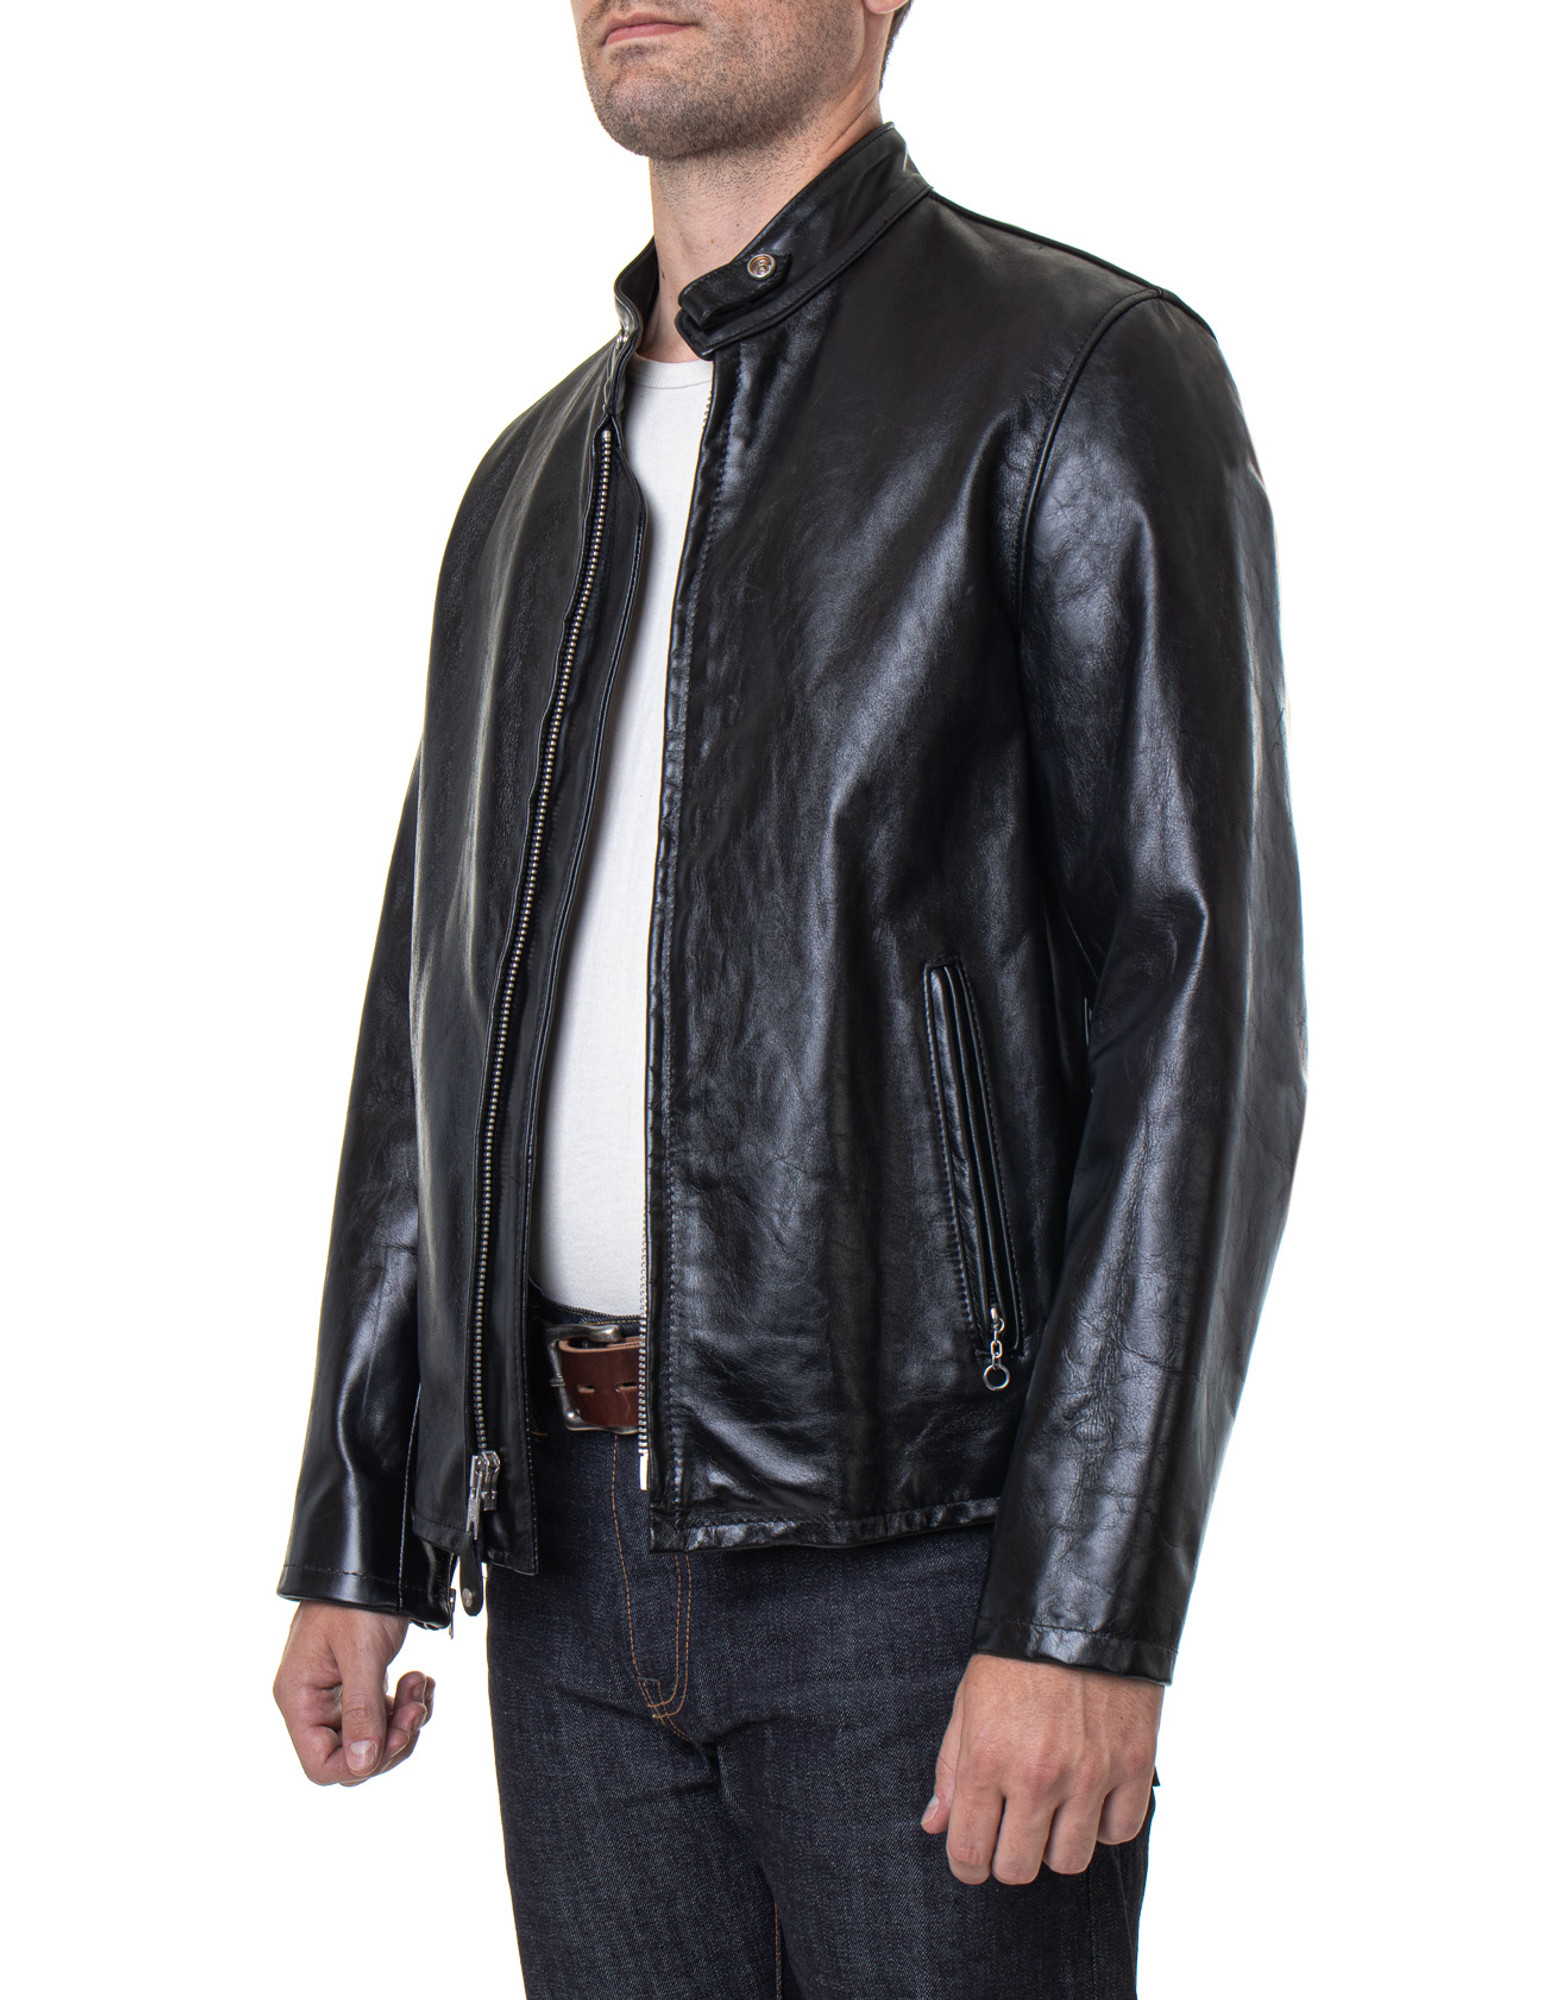 Spectacle heroic hot diesel l roshi leather jacket - classic-details.co.uk